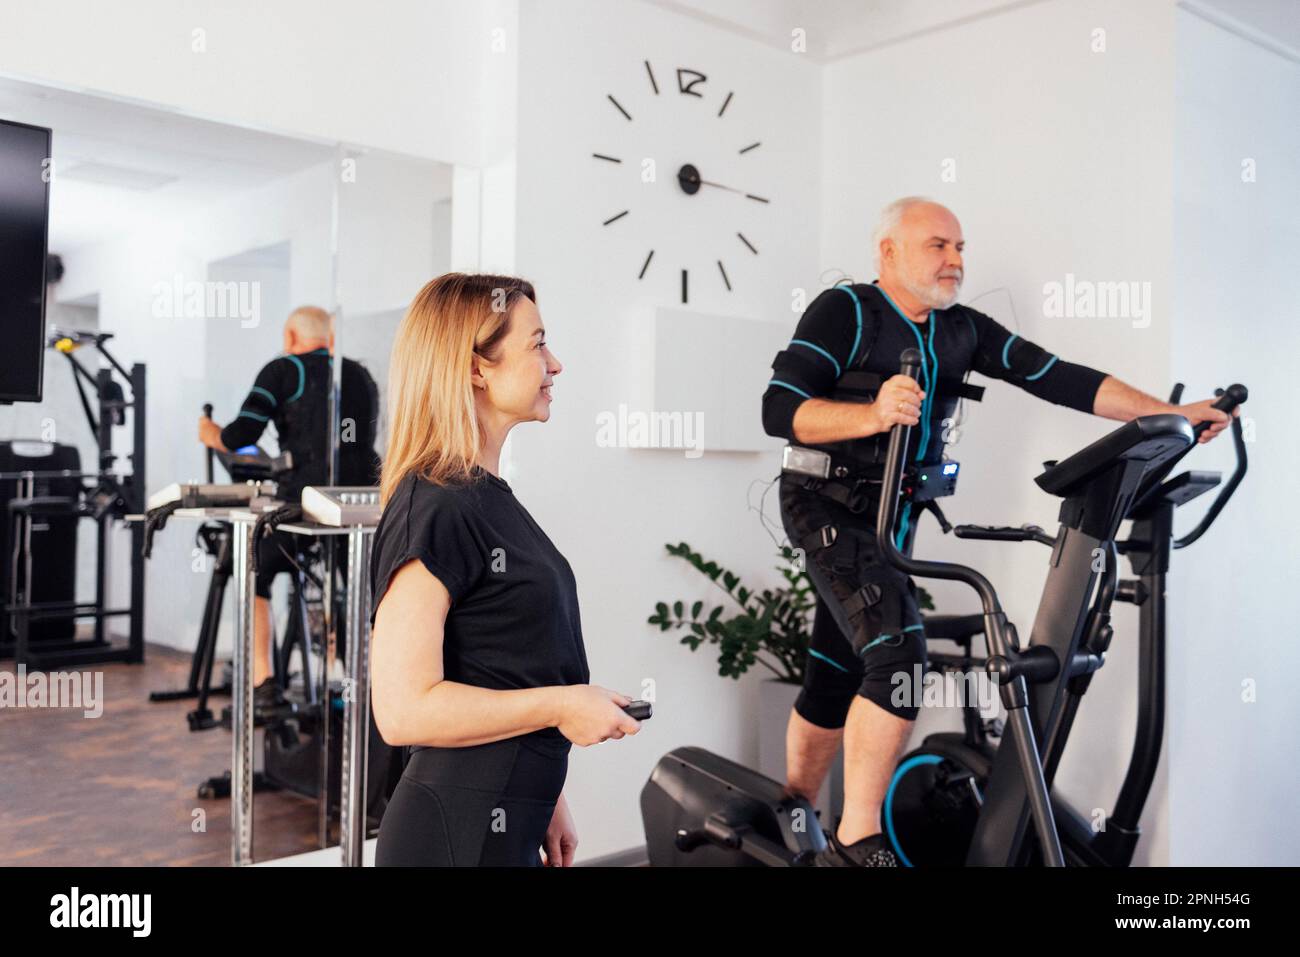 https://c8.alamy.com/comp/2PNH54G/young-smiling-trainer-is-doing-electrical-muscle-stimulation-workout-for-her-client-elderly-greyhaired-man-is-engaged-in-ems-suit-on-elliptical-train-2PNH54G.jpg